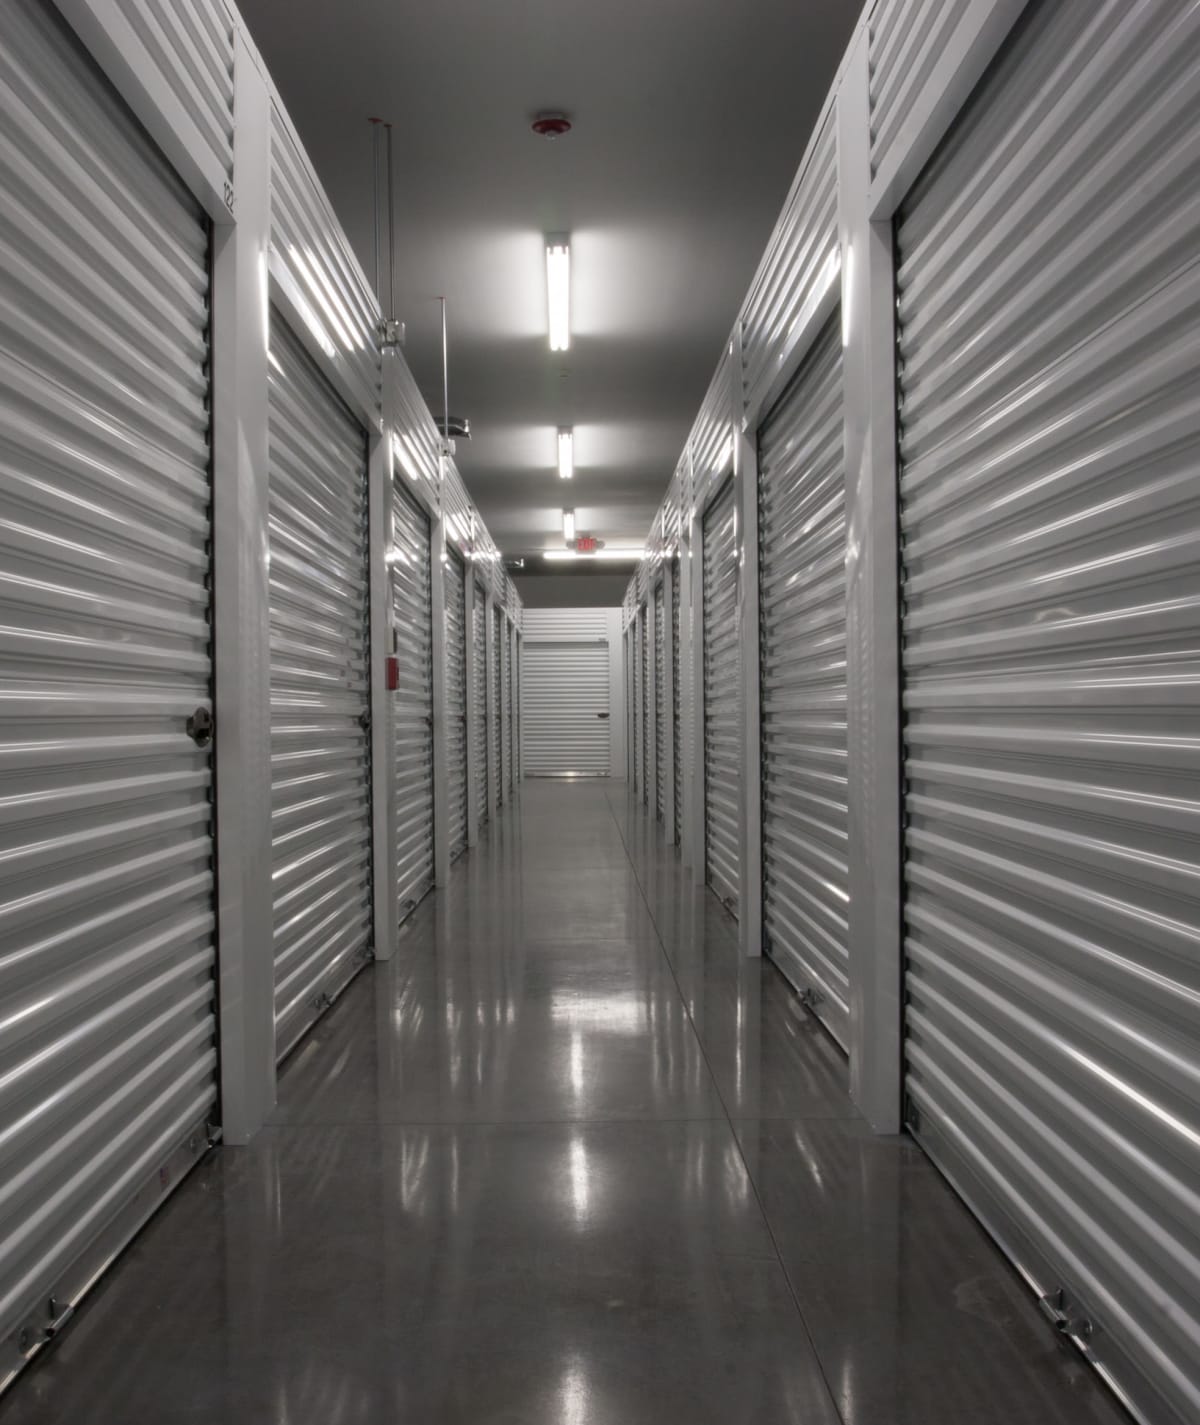 Contact us today at Excess Self Storage H & R Drive in Knightdale, North Carolina